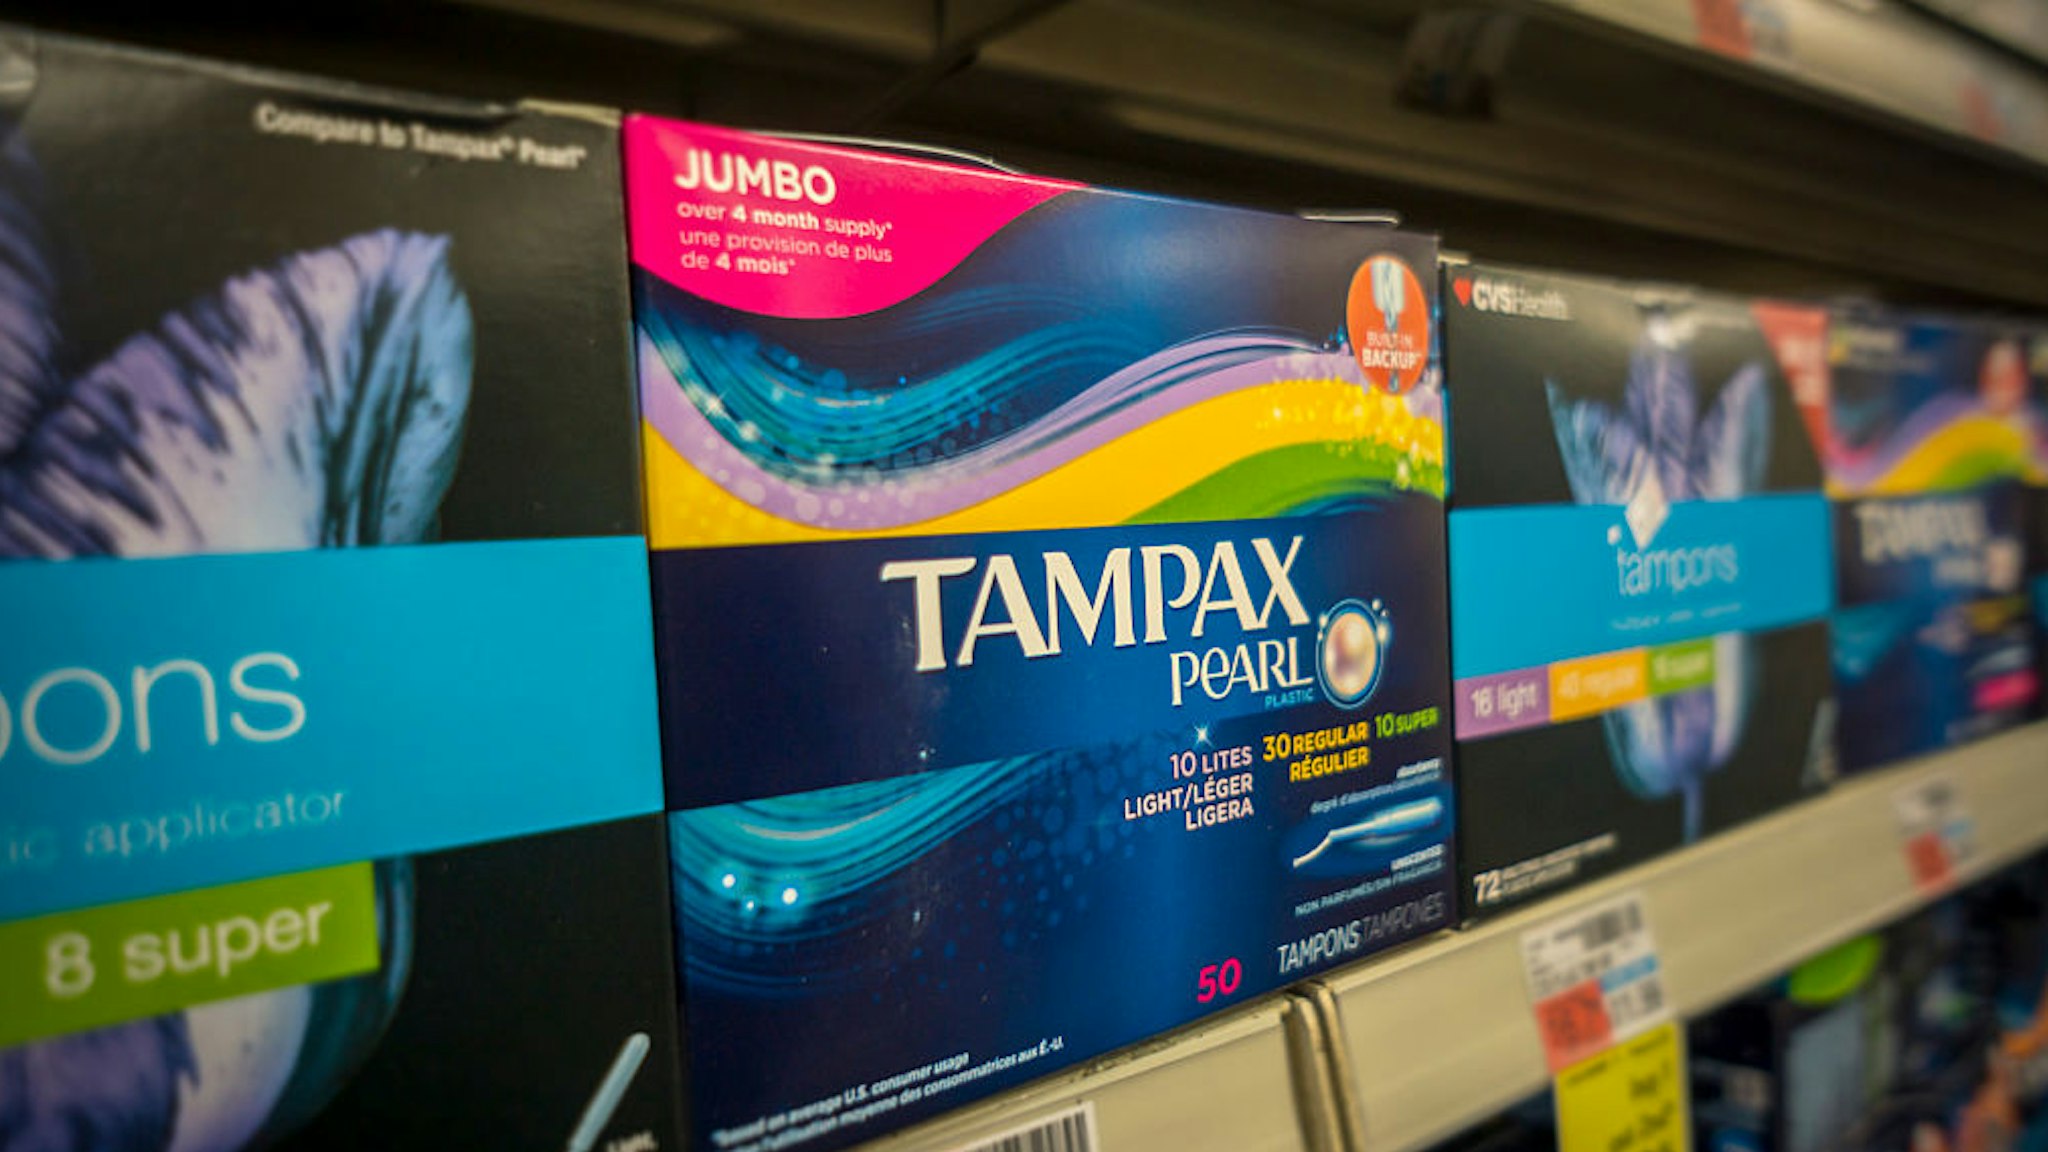 Packages of Tampax brand tampons on a drugstore shelf in New York on Wednesday, February 10, 2016. A bill making its way through the Utah legislature would eliminate tax on tampons and other feminine hygiene products. 40 states currently impose a sales tax on feminine hygiene products and there is also a bill under consideration in California to eliminate the tax. (�� Richard B. Levine) (Photo by Richard Levine/Corbis via Getty Images)